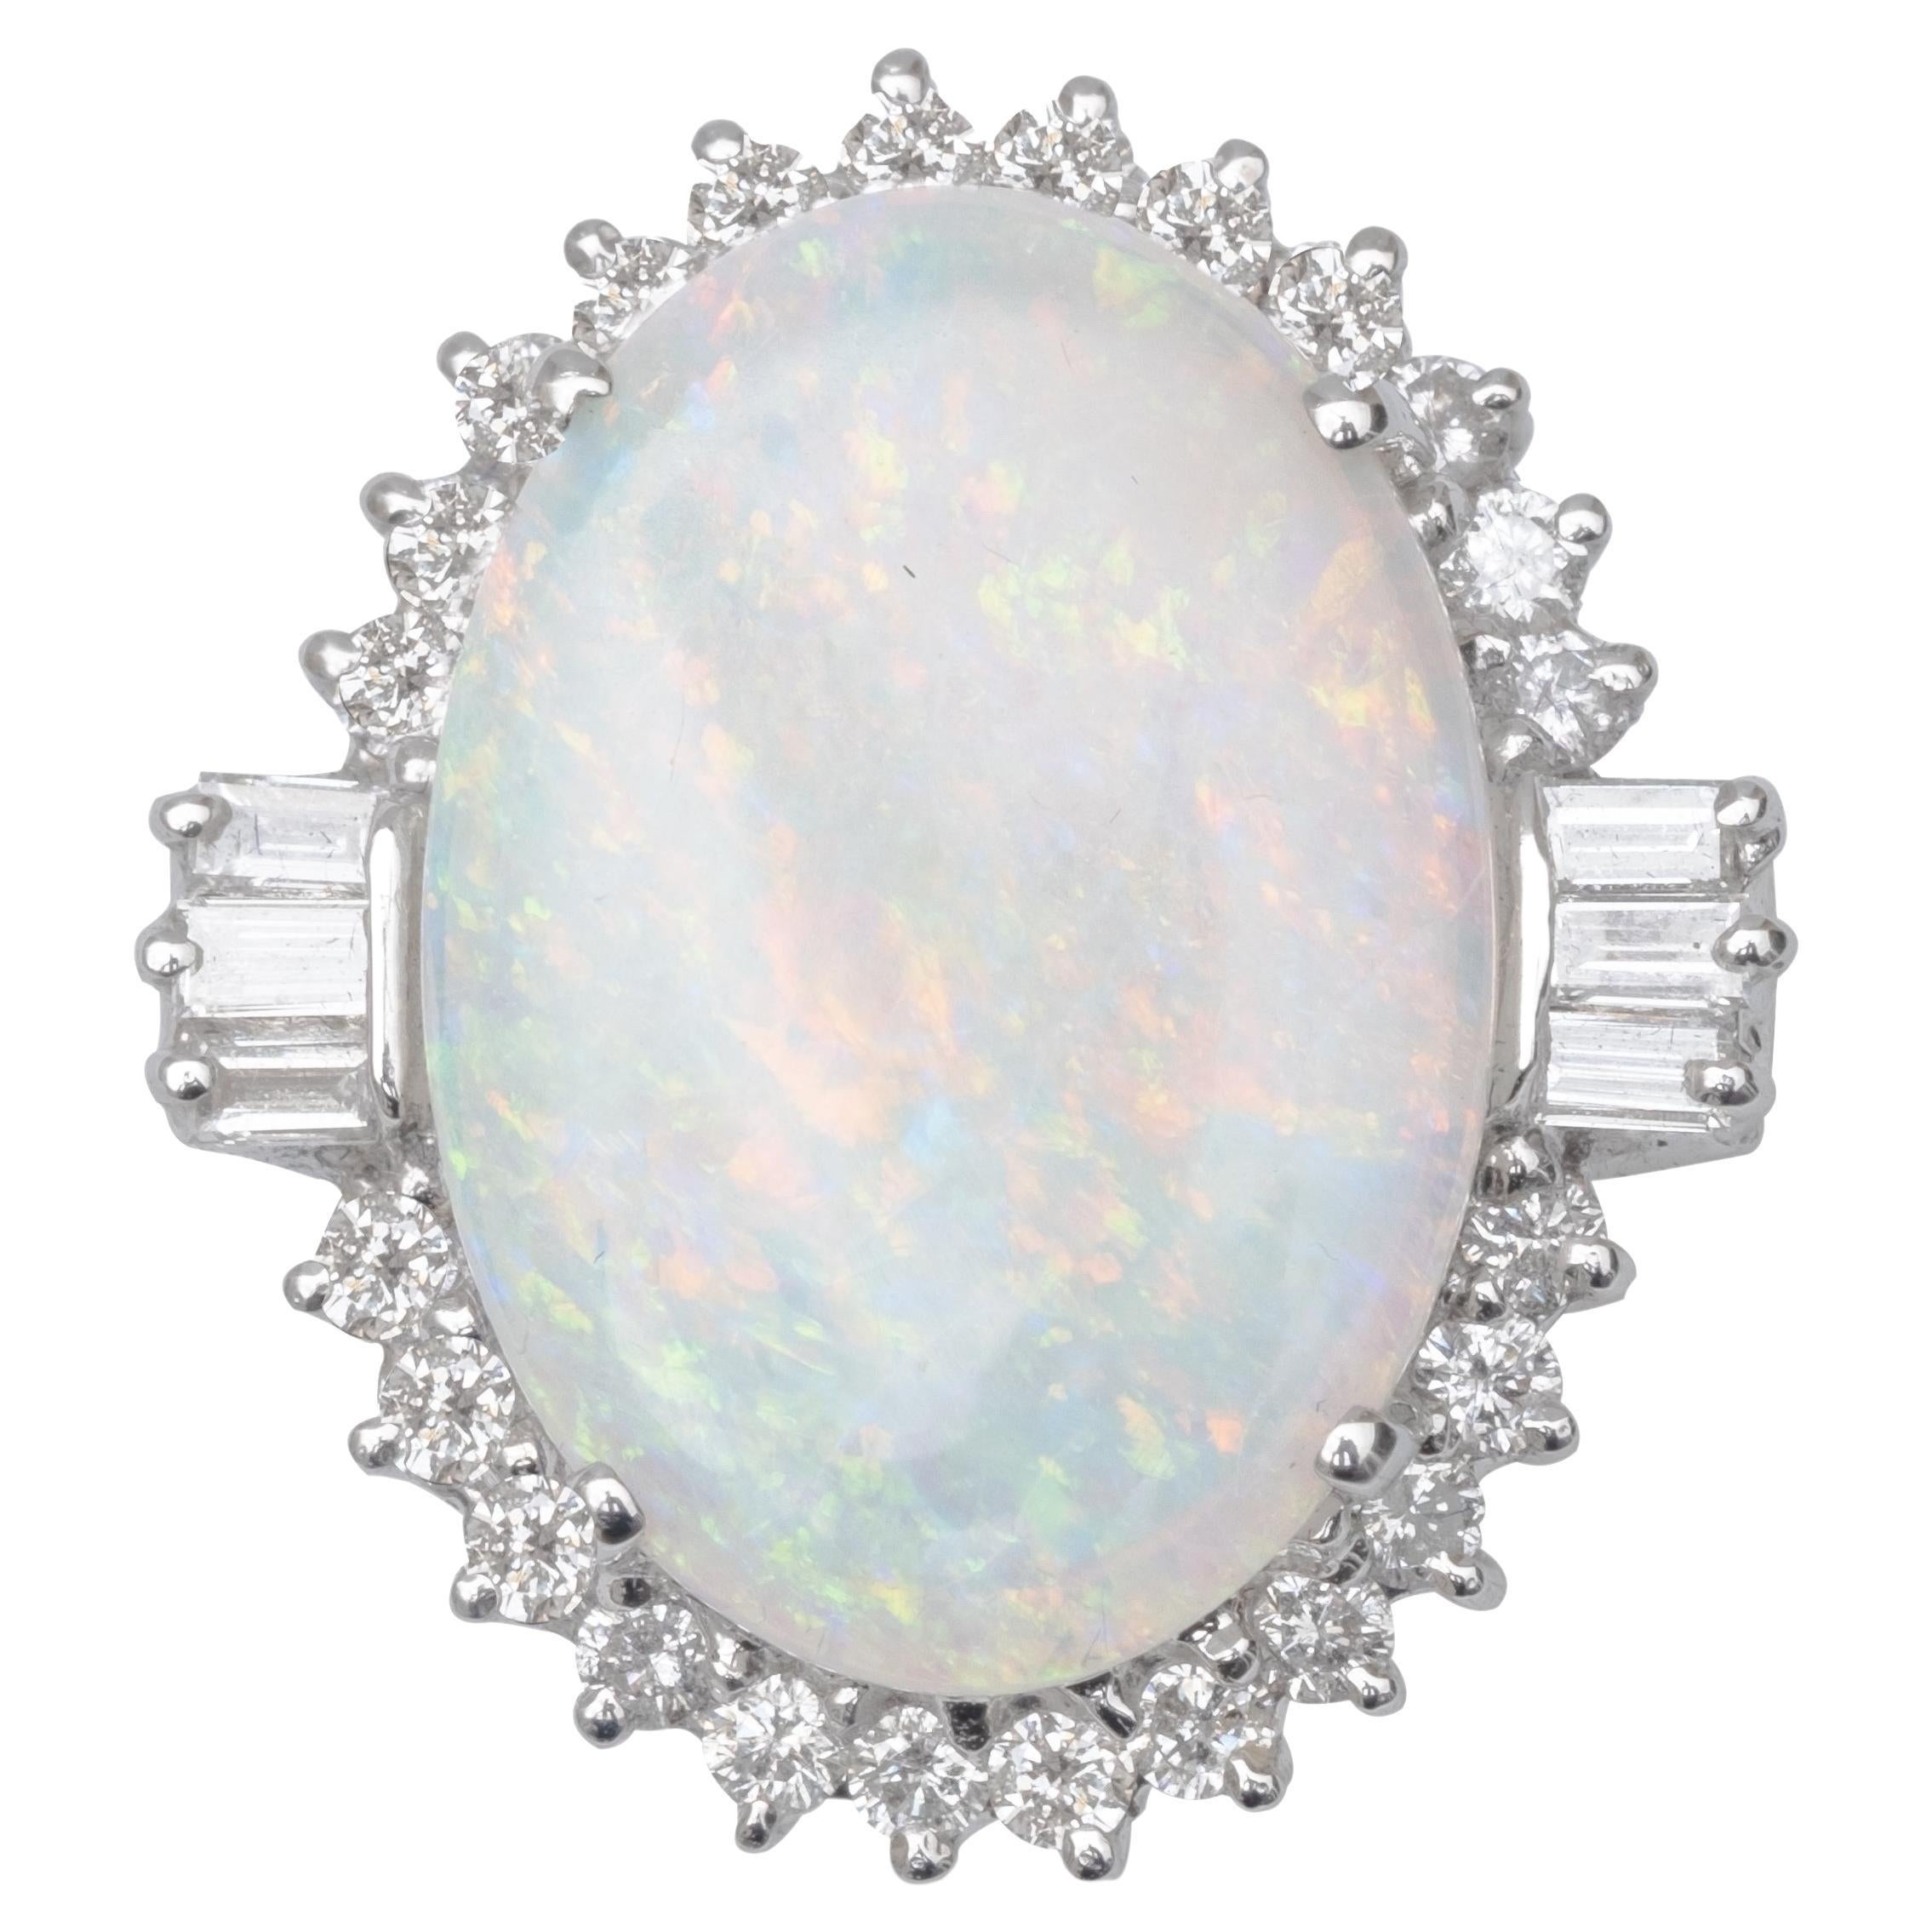 14k Gold Opal Diamond Halo Statement Ring with Appraisal Letter